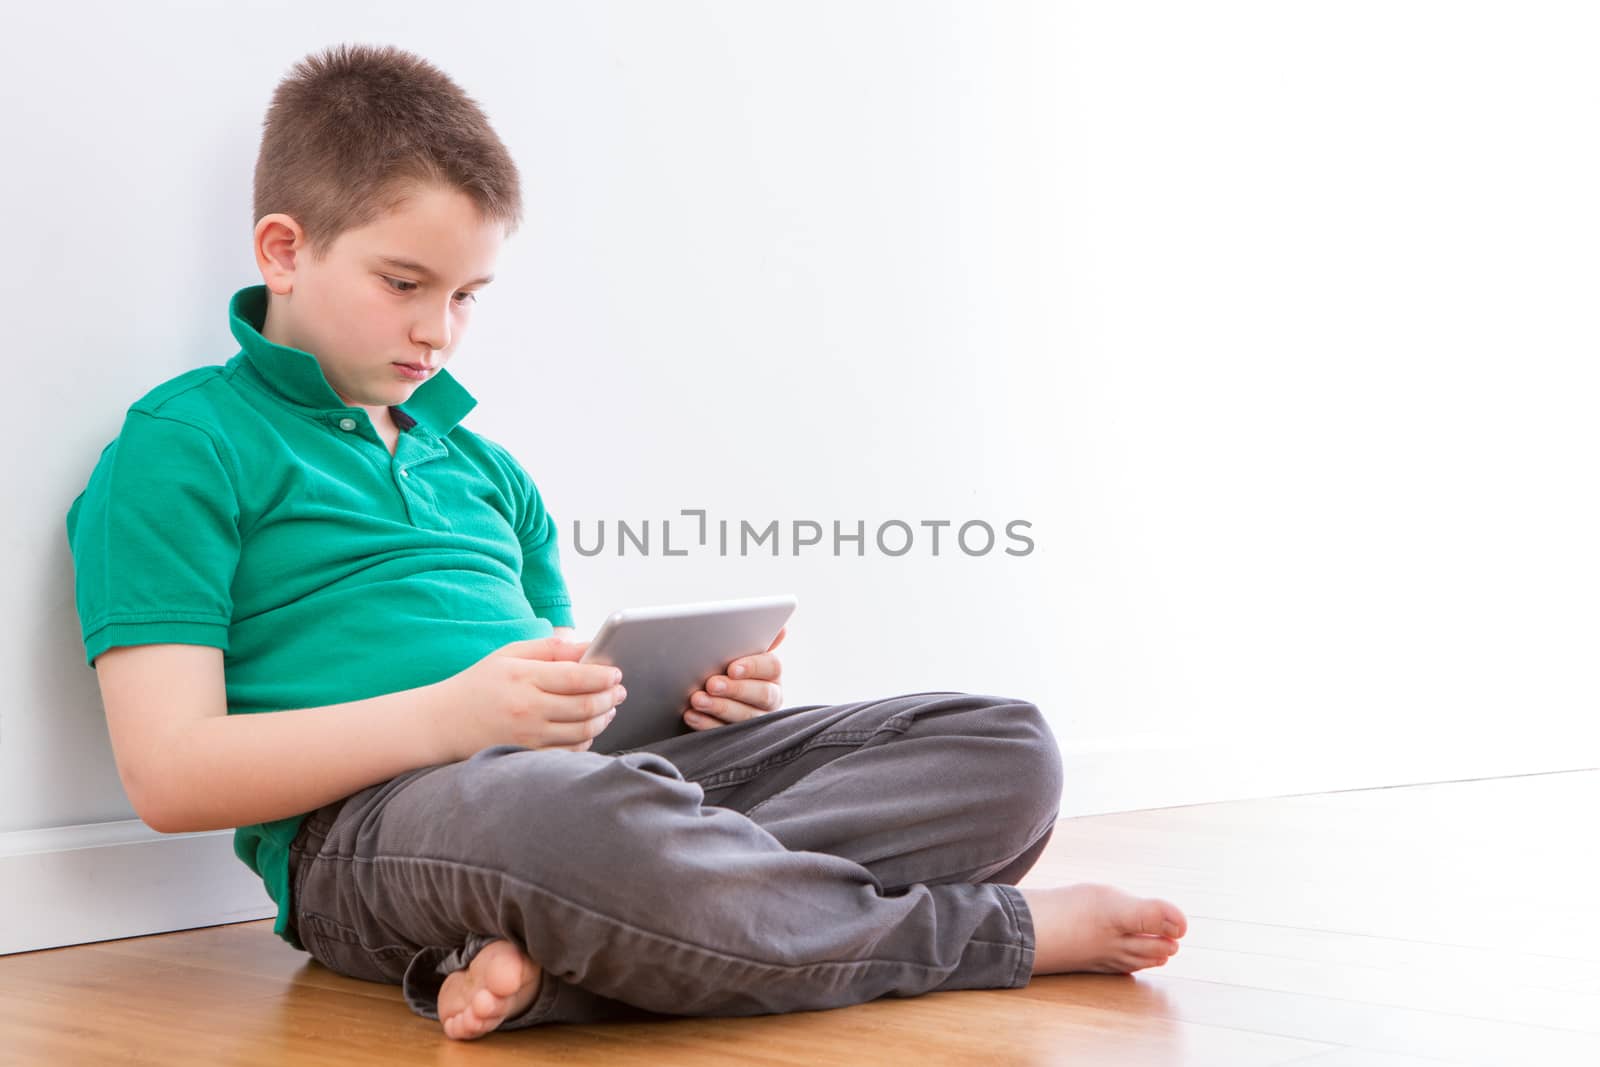 Close up Serious Handsome Young Boy Playing at his Tablet Computer, Sitting on the Floor Inside the House and Leaning on the Wall.